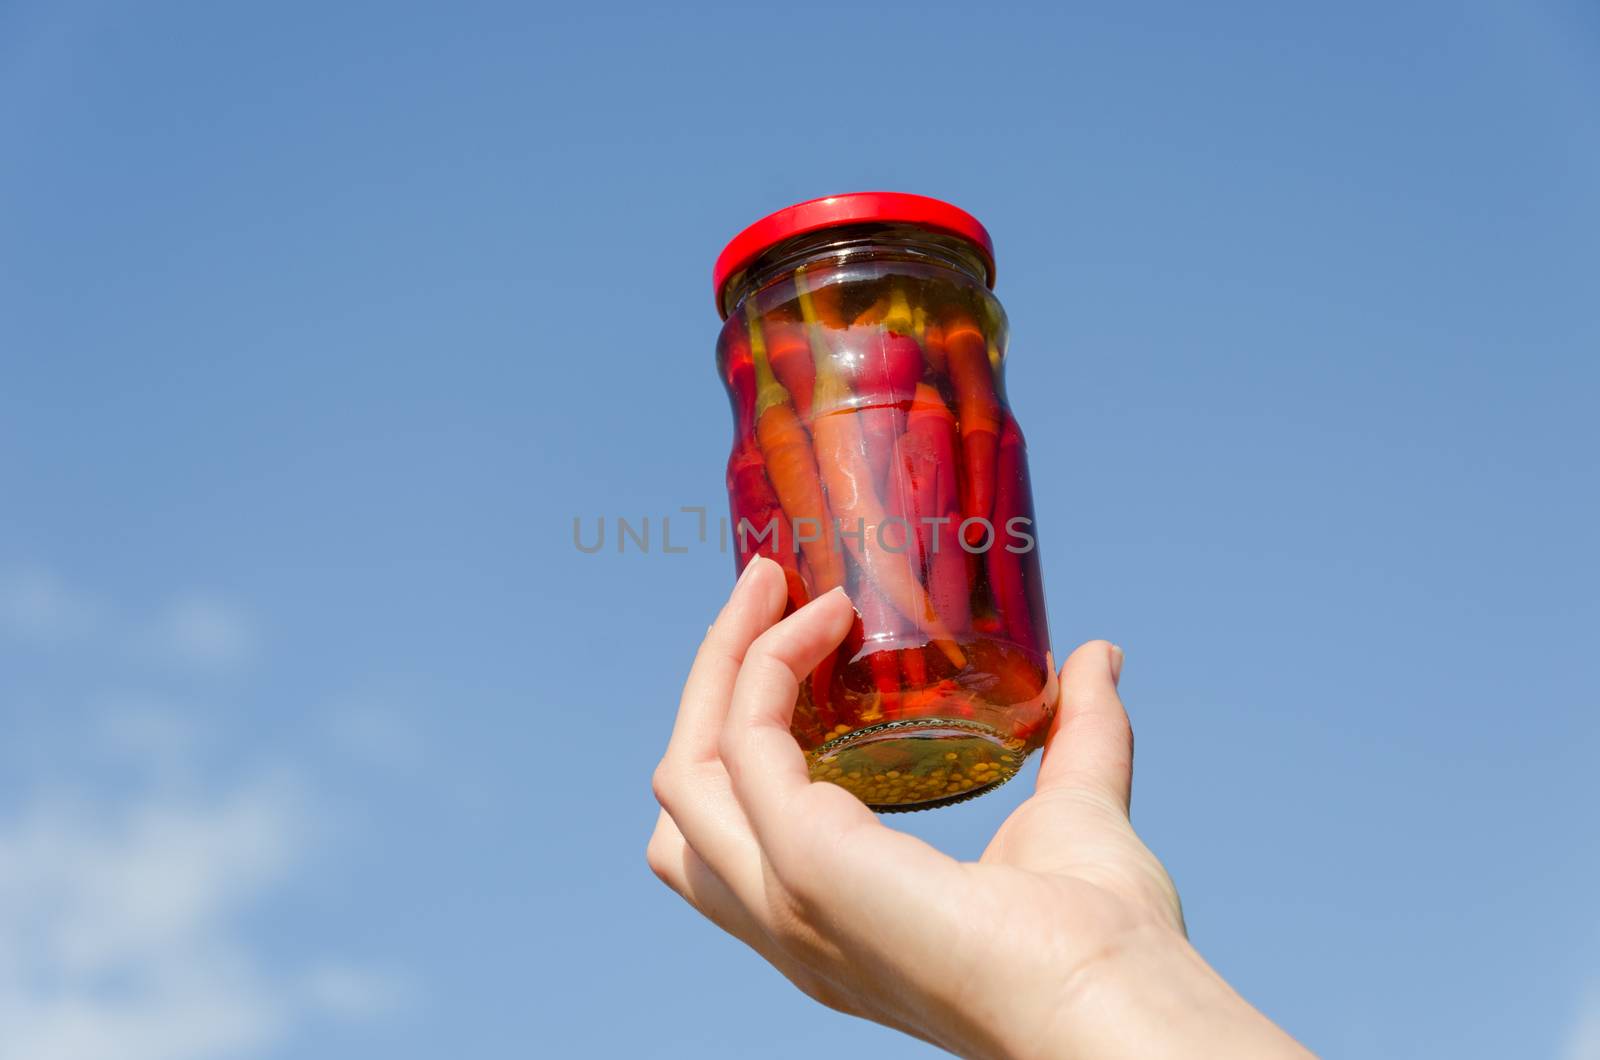 chili pepper jar in hand on blue sky background by sauletas